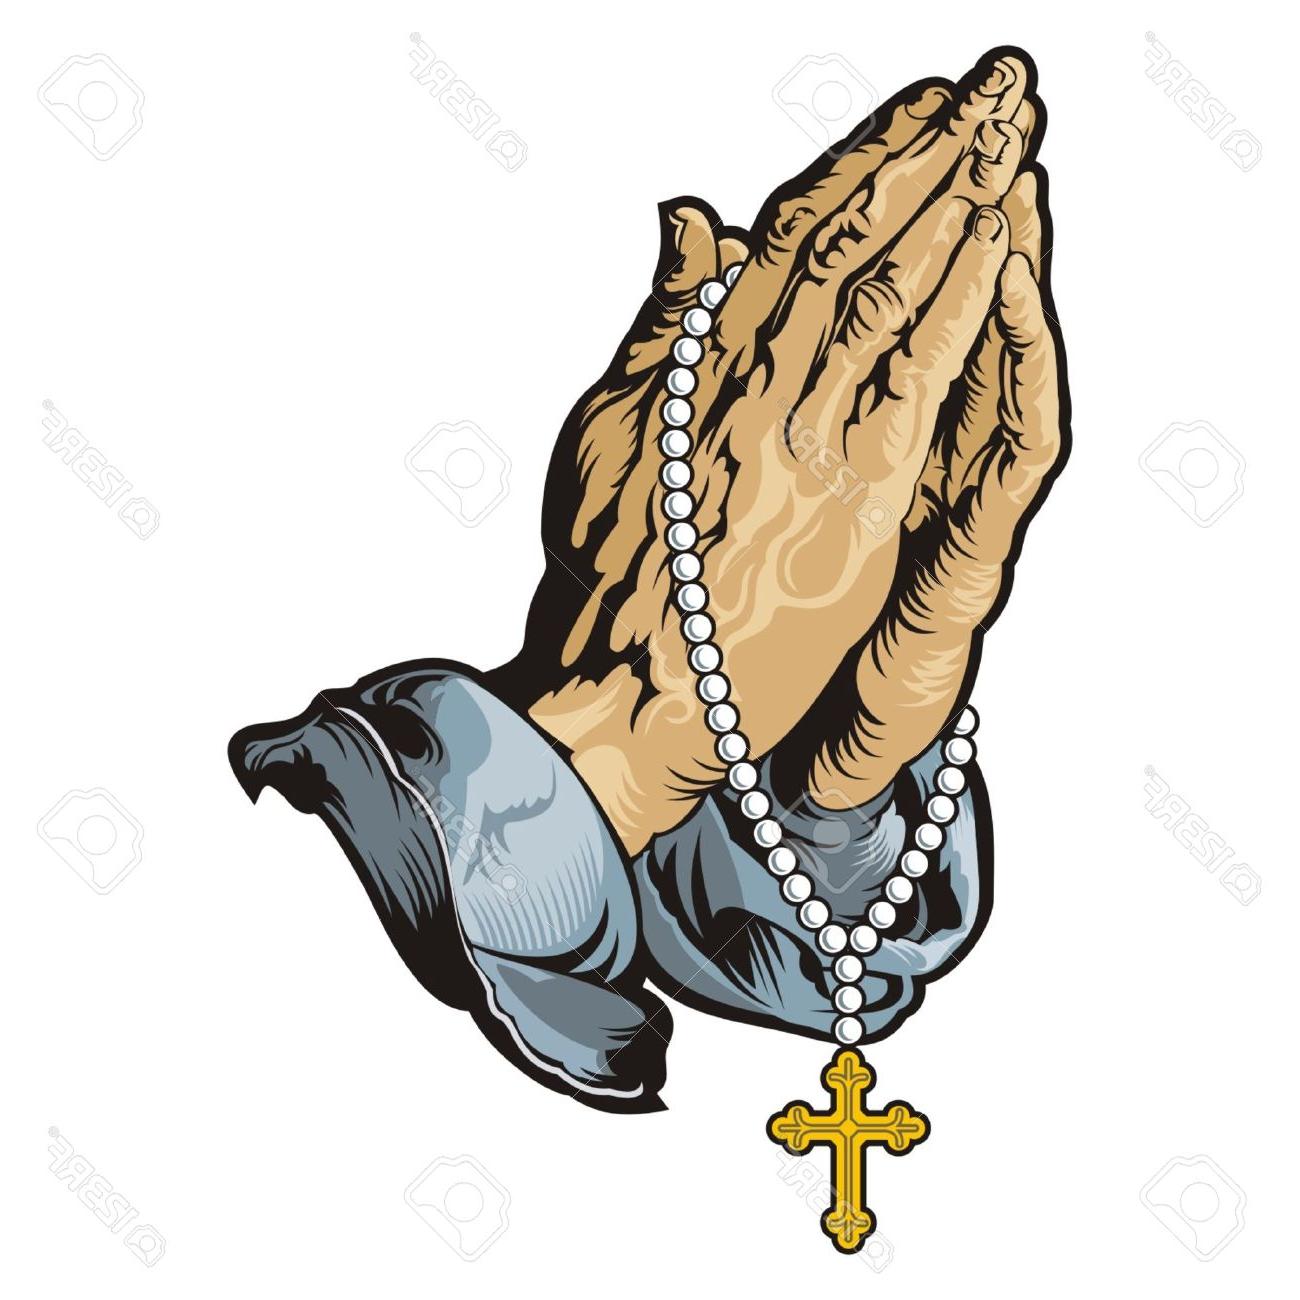 Best Free Praying Hands With Rosary Vector Stock Tattoo - Praying Hands With Rosary Clipart - HD Wallpaper 